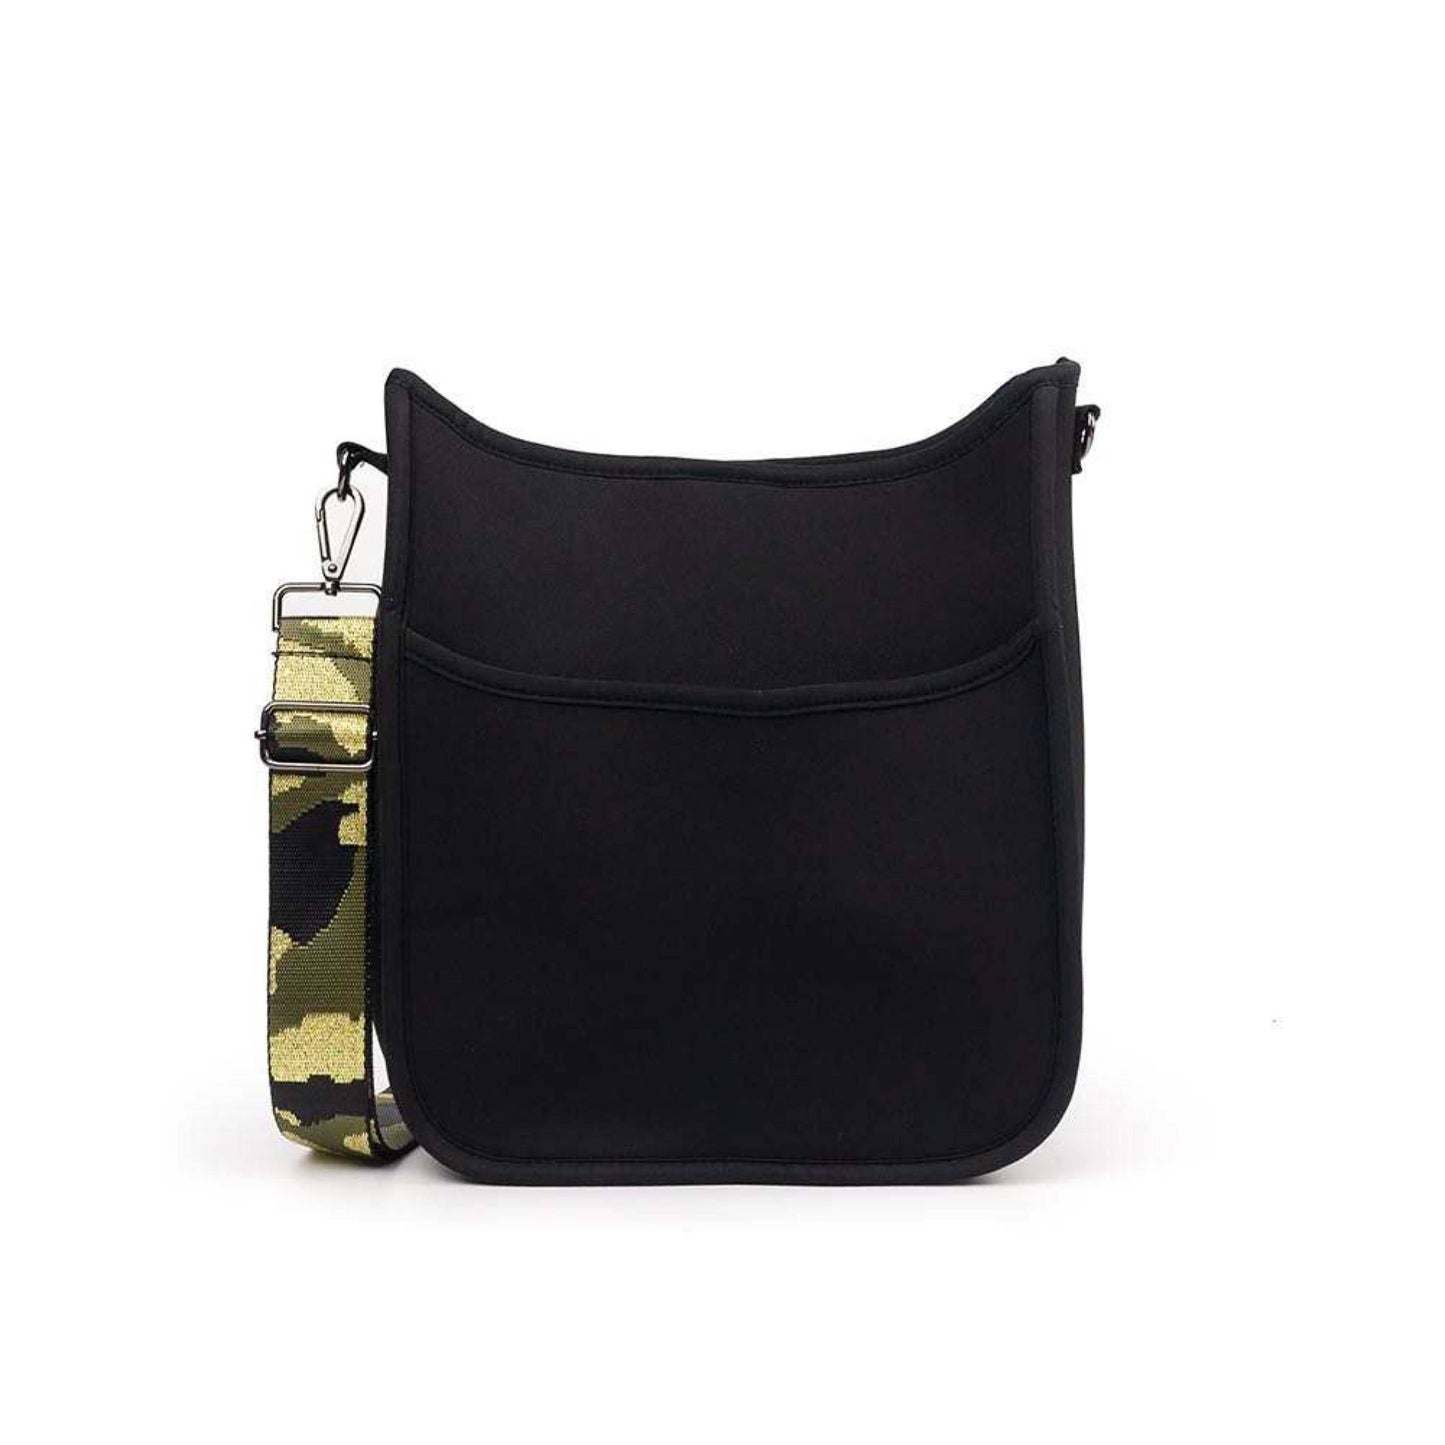 The Isabella Courier Crossbody - Black with Camo Strap